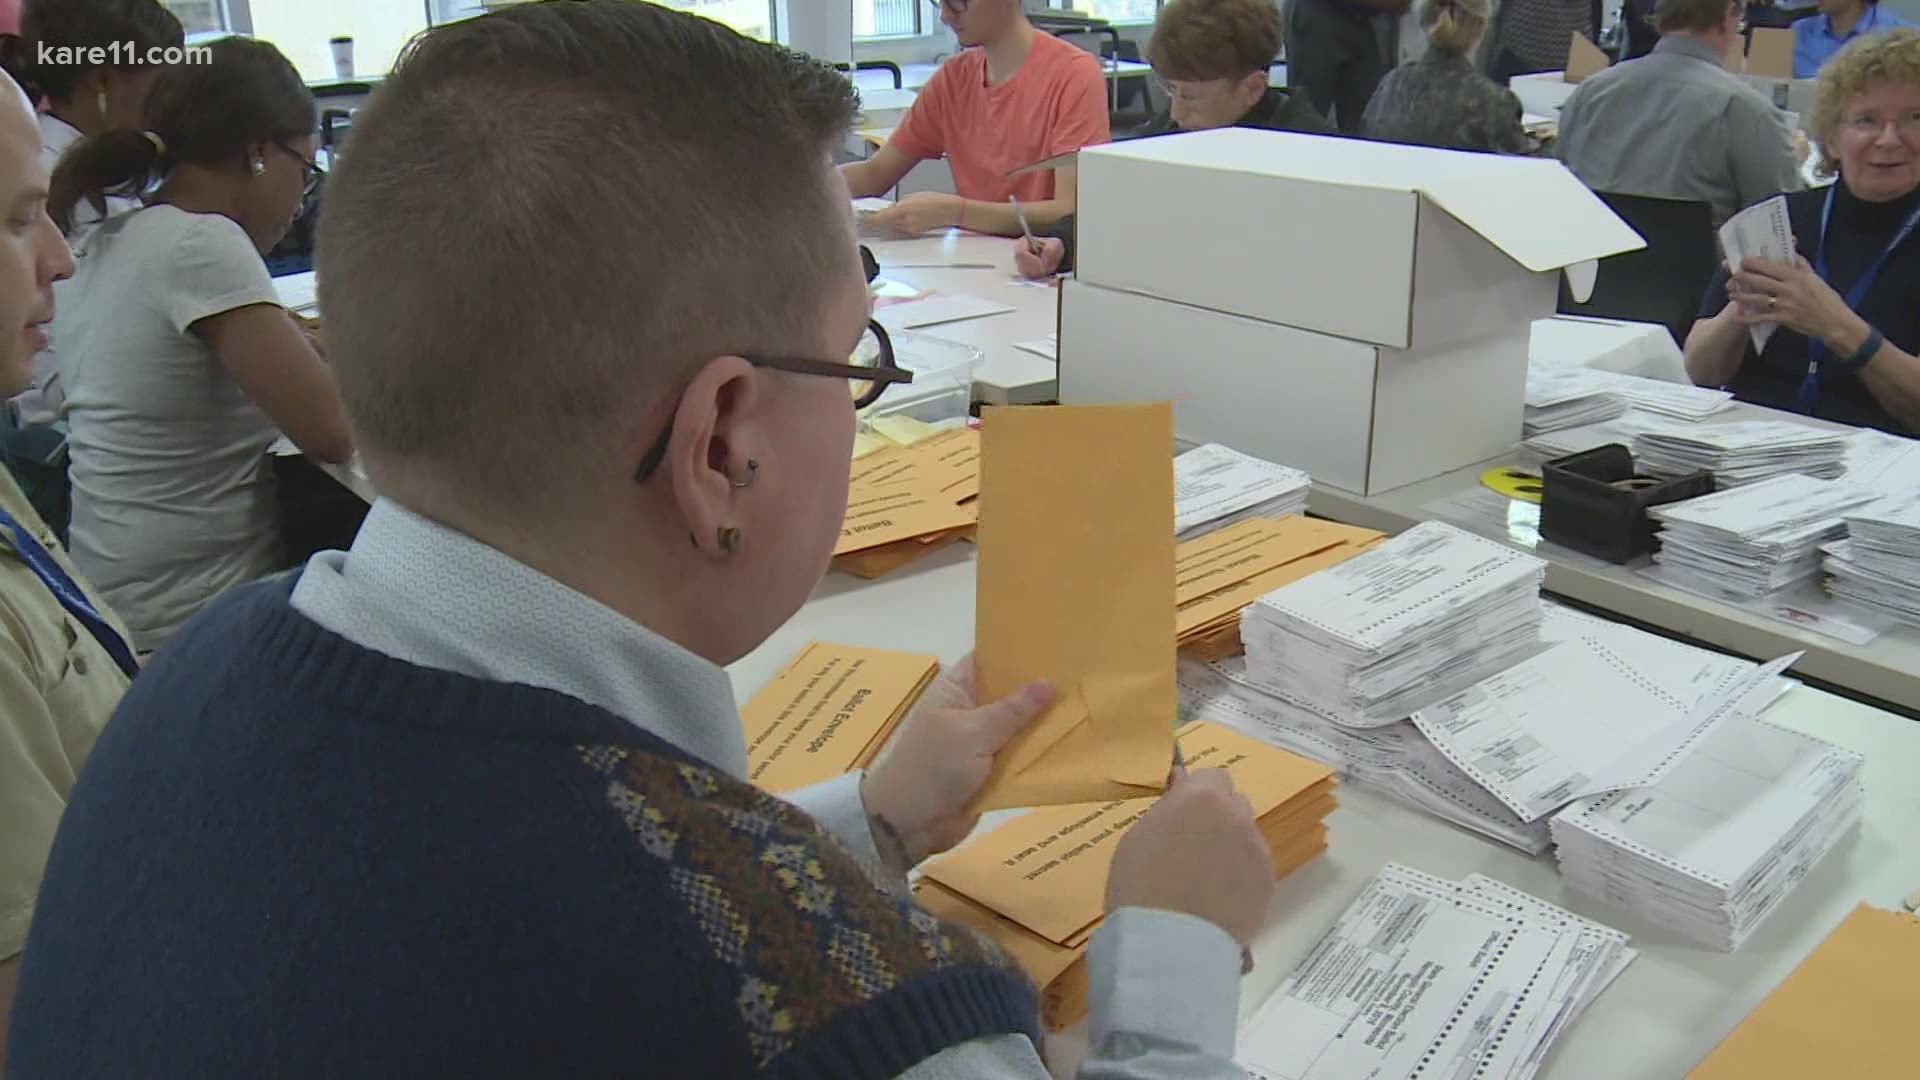 A number of security measures are in place to keep ballots safe from theft or double voting.